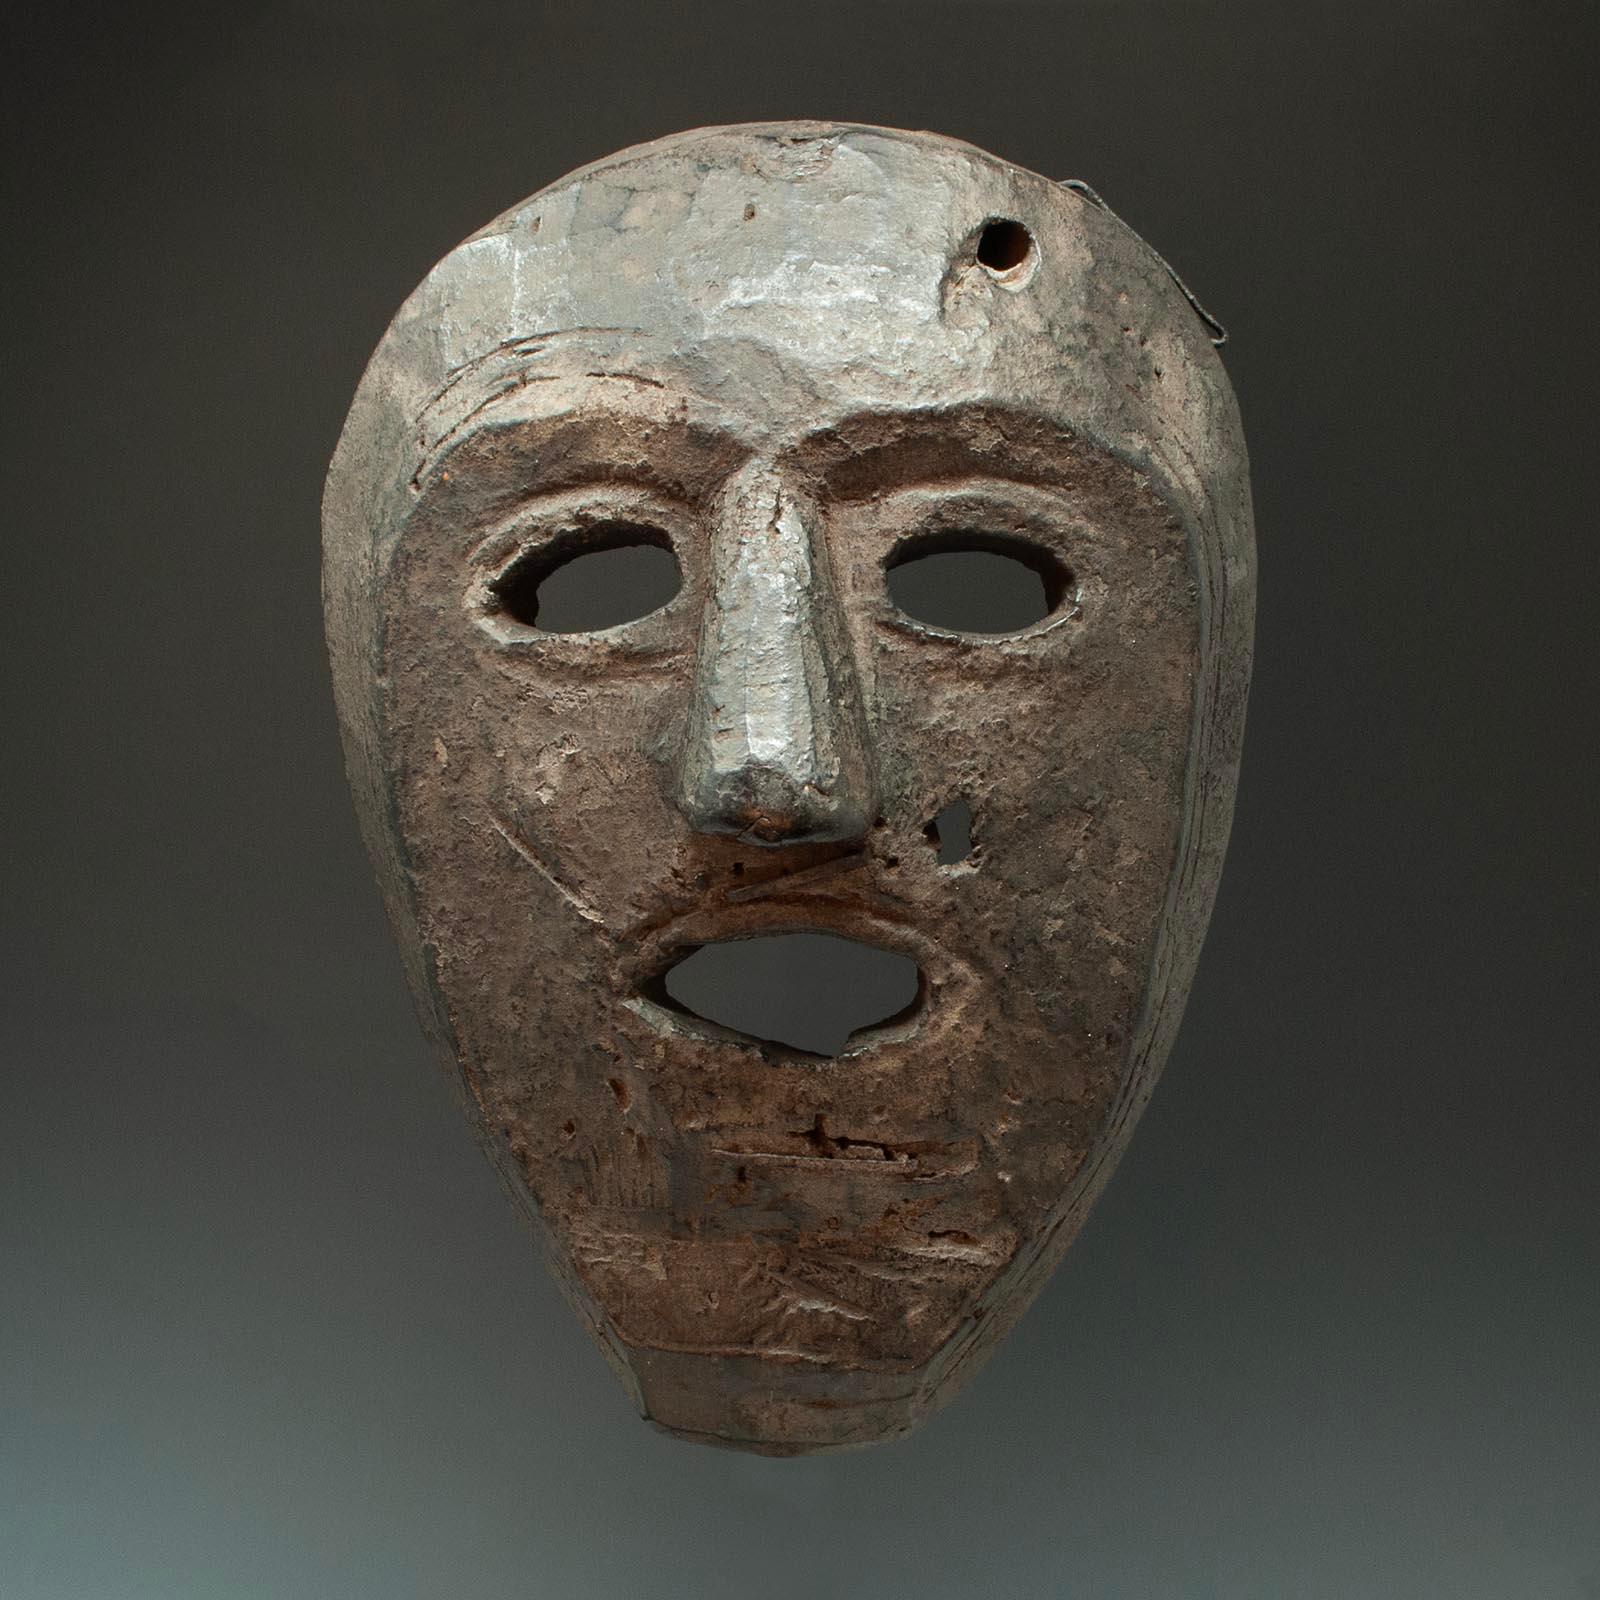 Late 19th-early 20th century Tribal mask, West Nepal

A mask from West Nepal with a rather heart shaped facial plane. There are three large iron staples, two of which may have secured fur or hair. The reverse shows deep adze work and rich patina